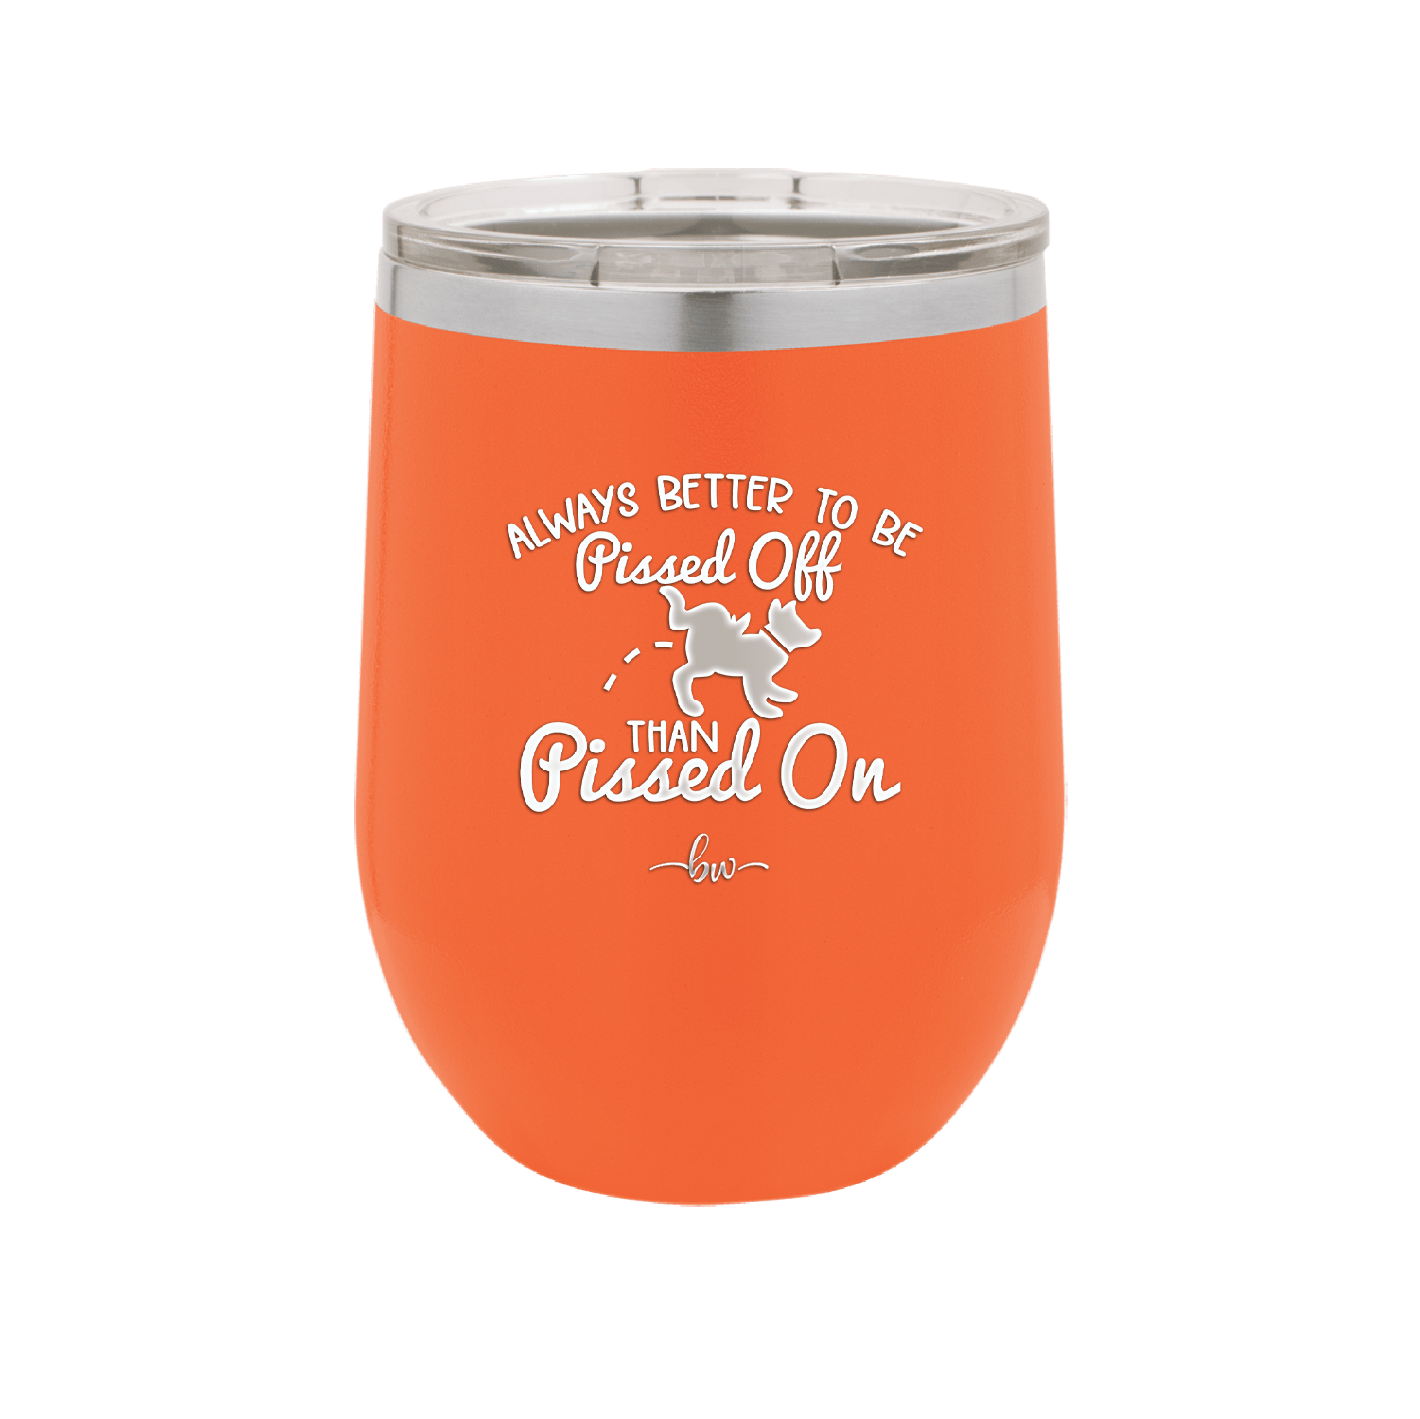 Always Better to Be Pissed Off than Pissed On - Laser Engraved Stainless Steel Drinkware - 2482 -